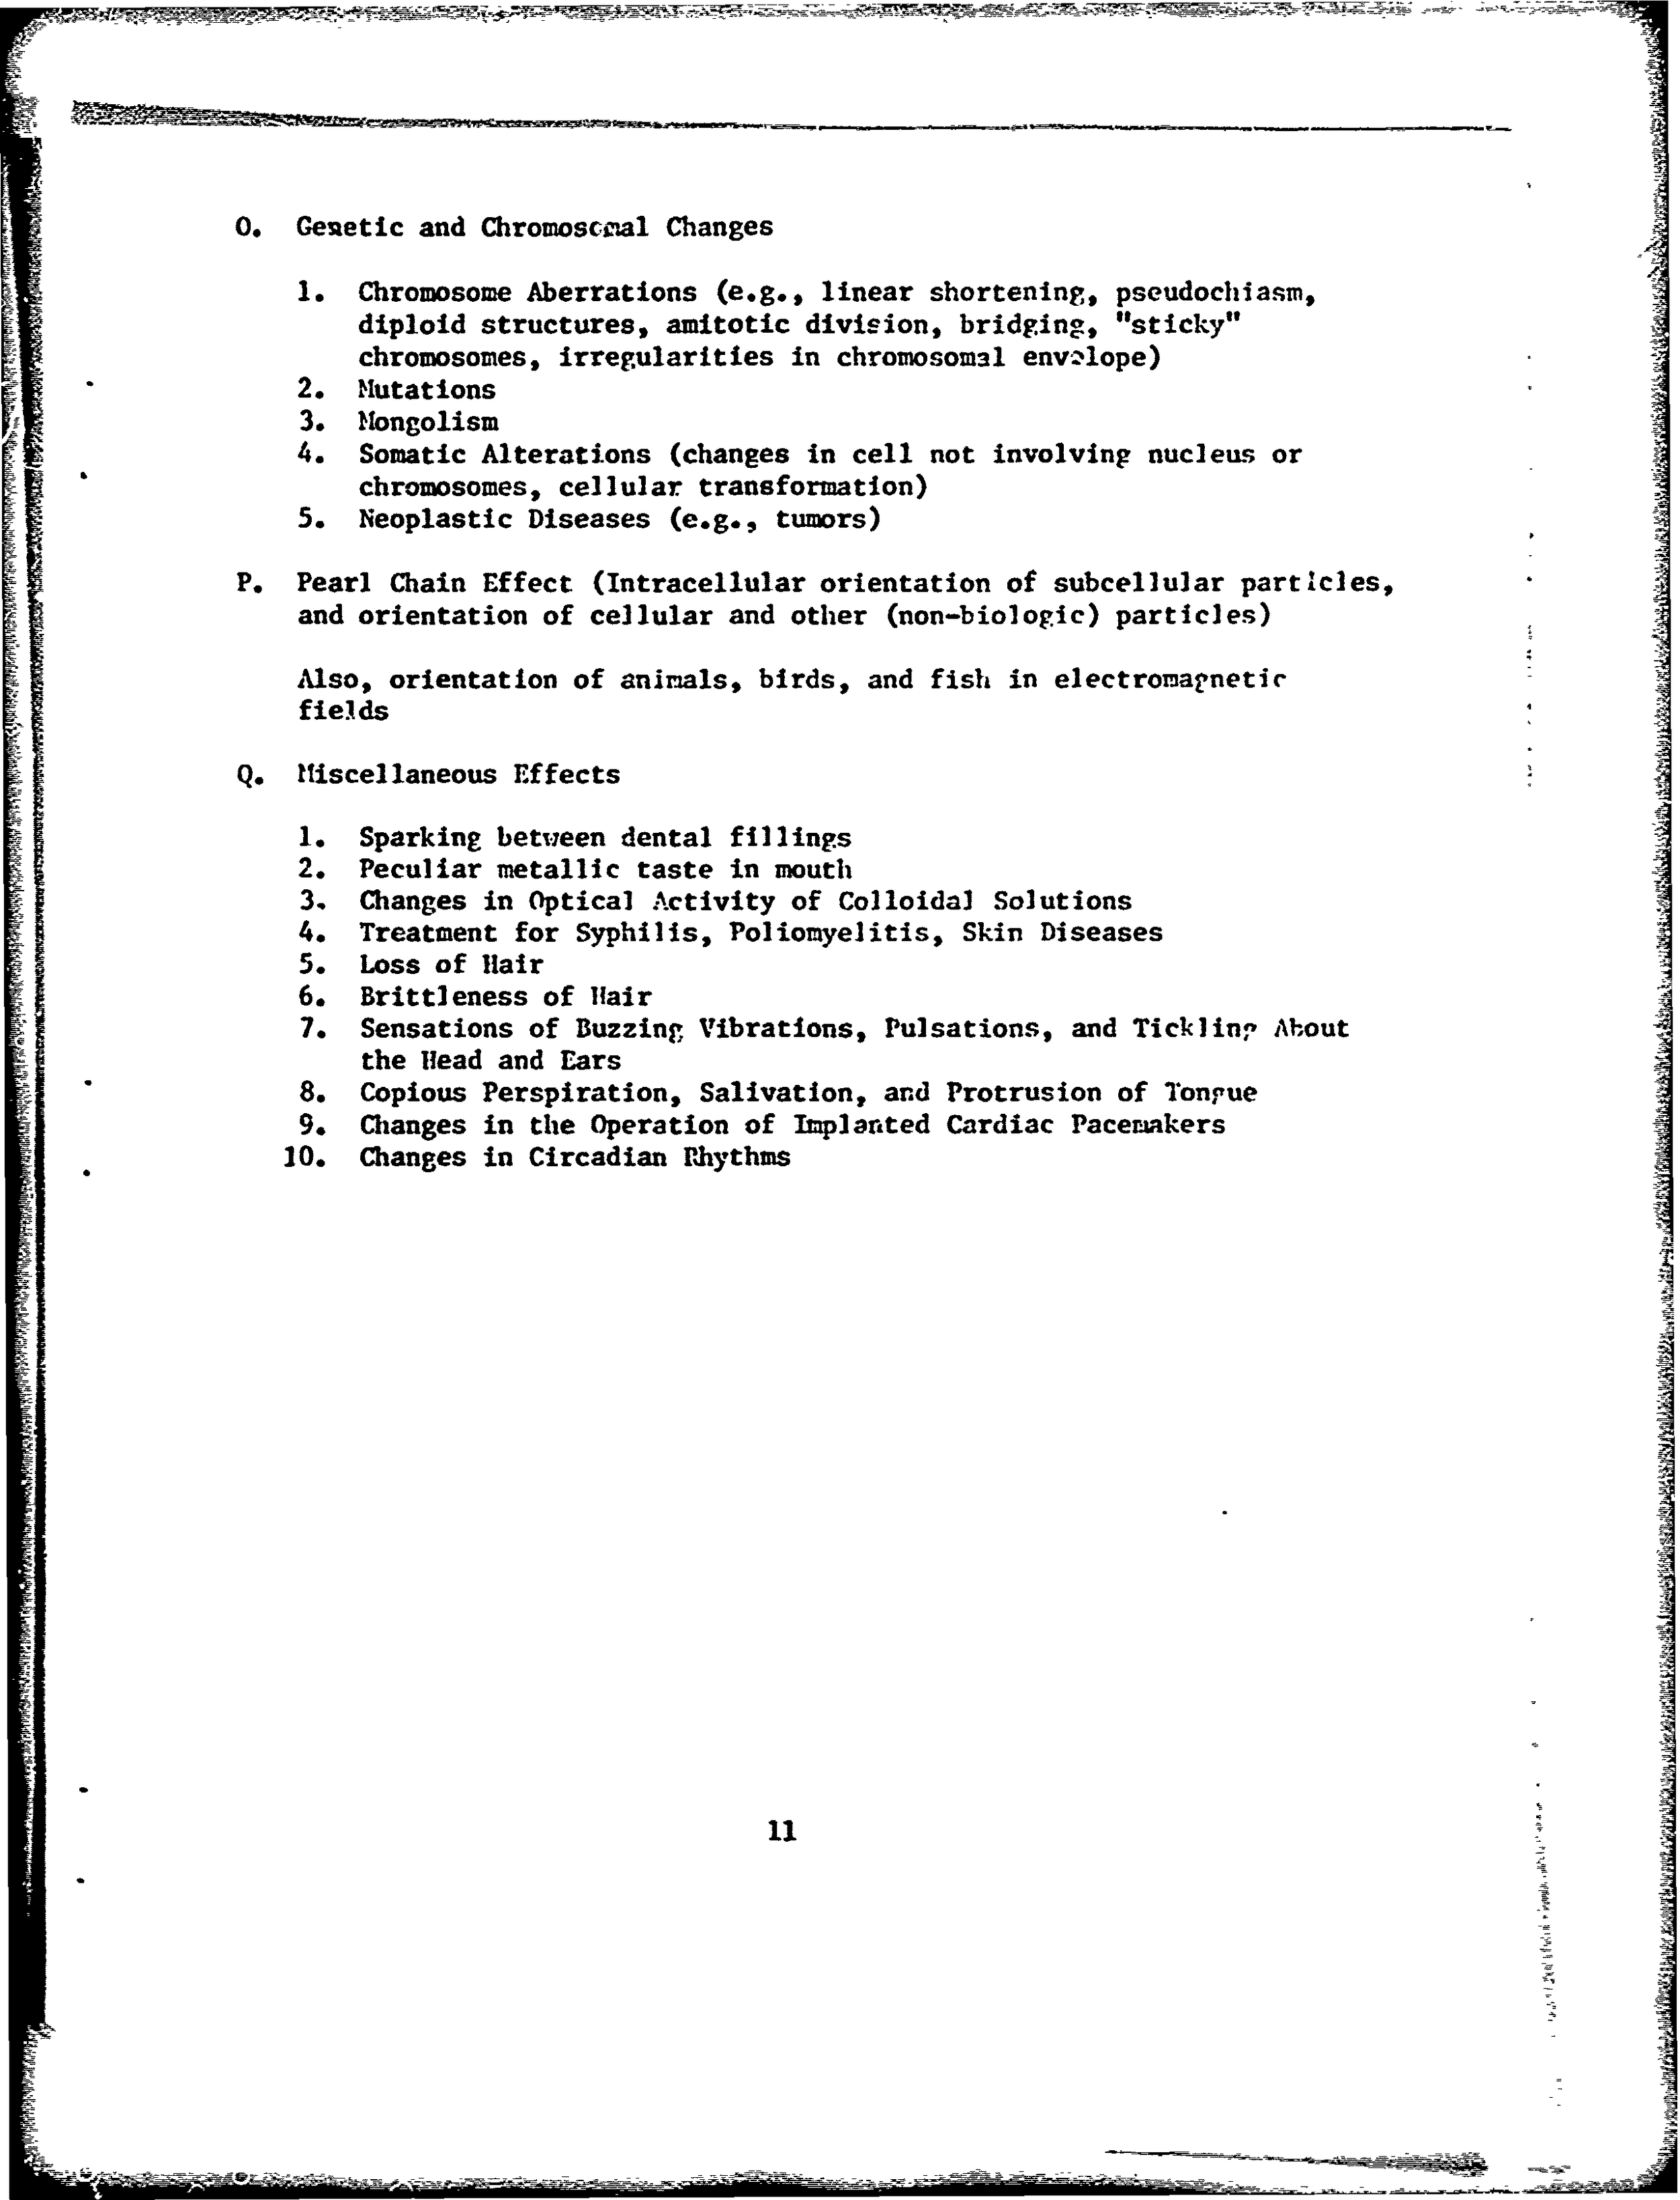 BIBLIOGRAPHY_OF_REPORTED_BIOLOGICAL_PHENOMENA_'EFFECTS'_AND_CLINICAL_Page_14.png